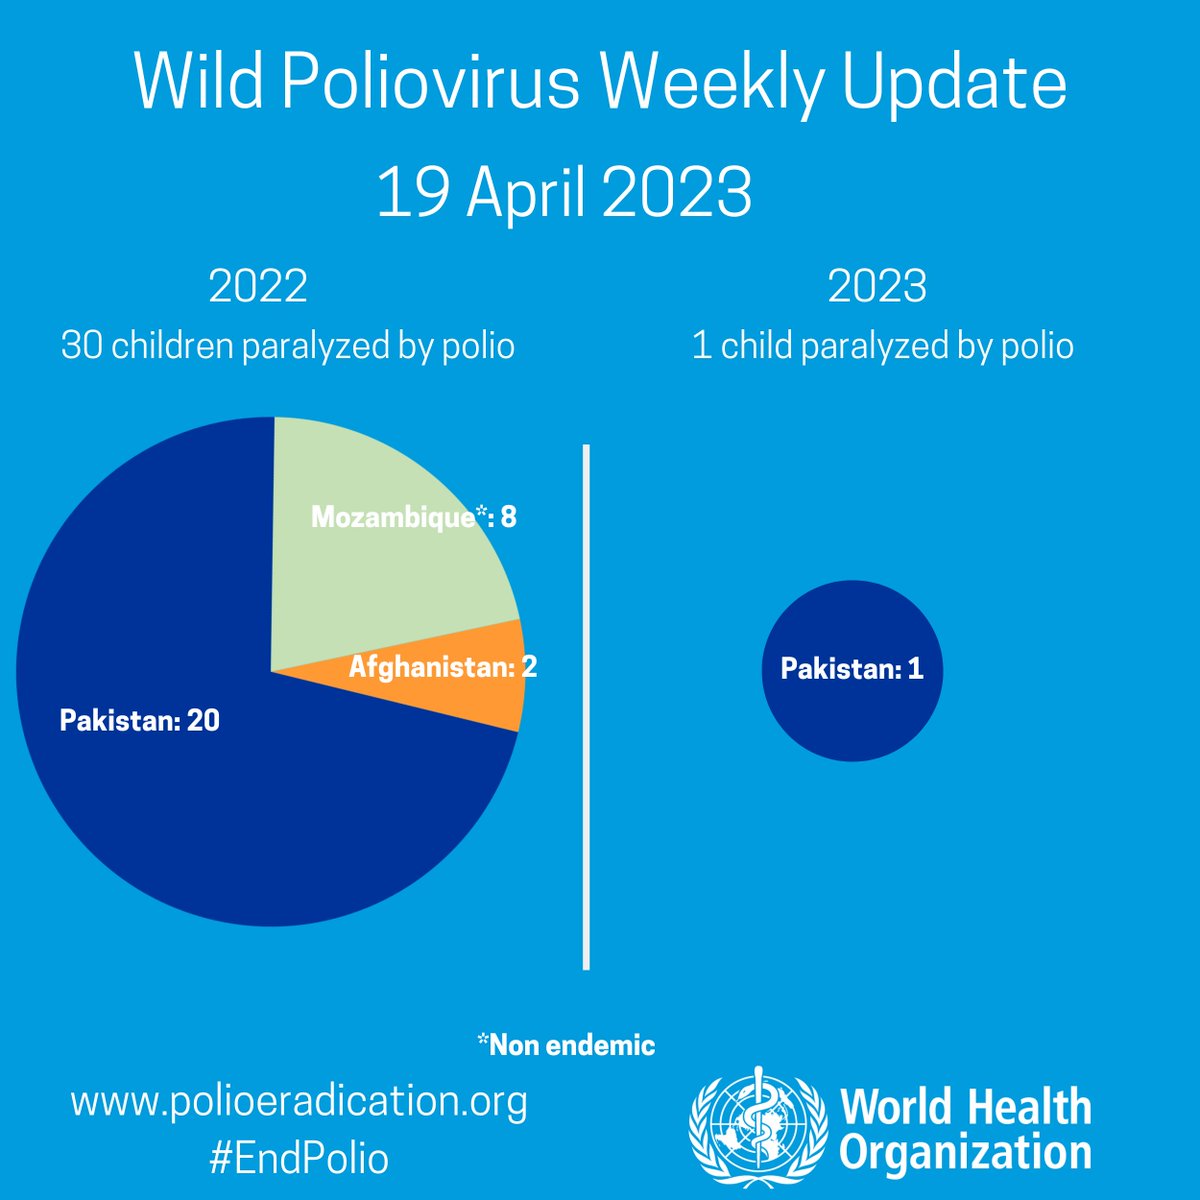 Wild poliovirus weekly case update from @WHO: No new case. In 2023: Pakistan: 1. In 2022: Afghanistan: 2, Pakistan: 20, Mozambique: 8. bit.ly/3MnsSxA. #EndPolio.